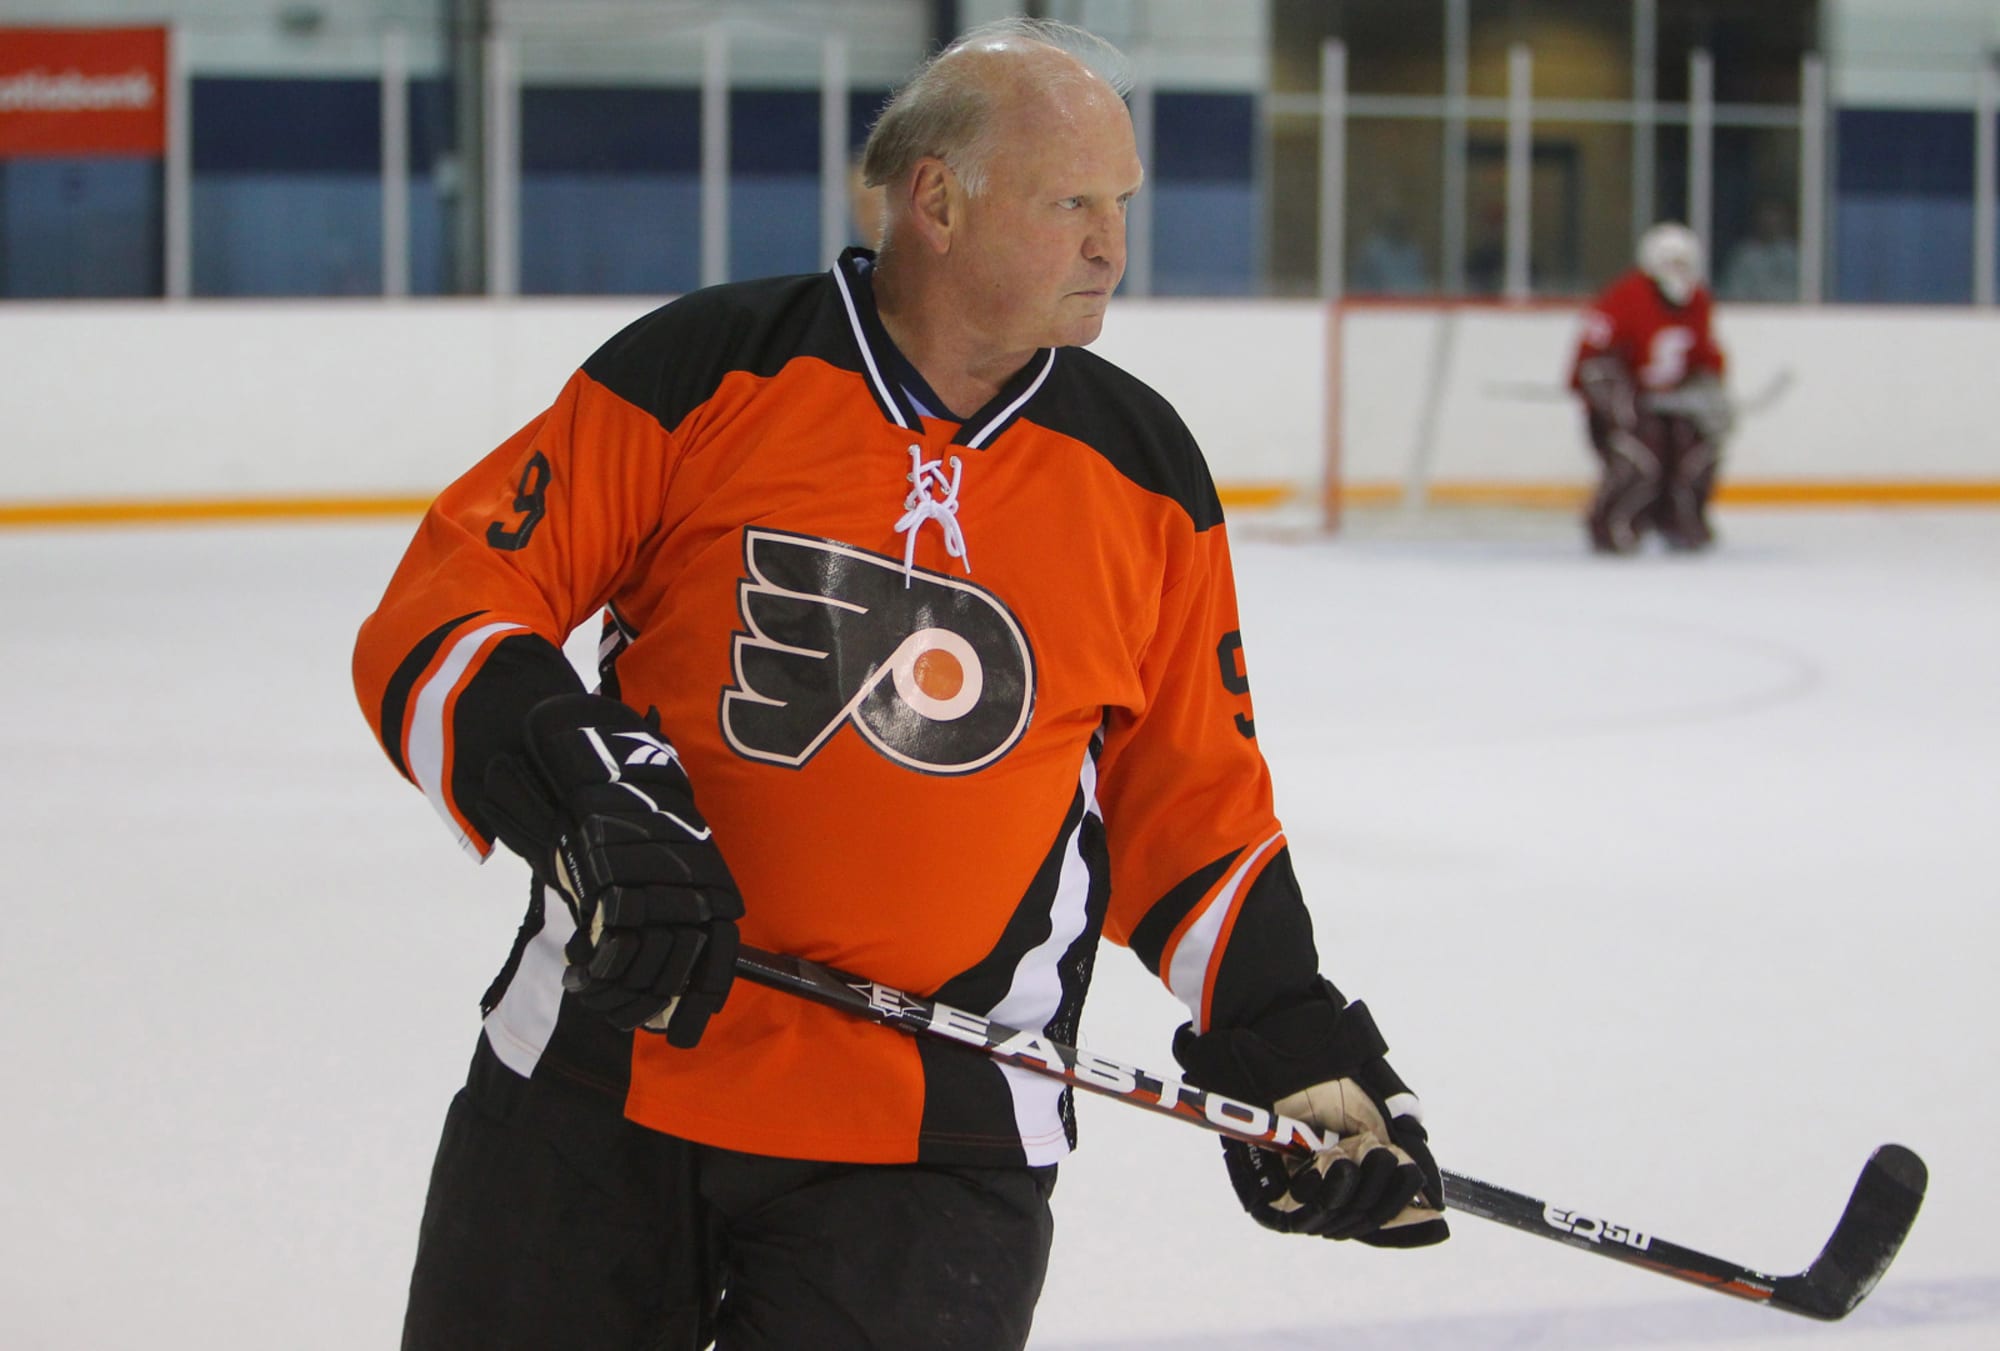 30 Best Players To Not Win Cup? How About Flyers' Mark Howe?